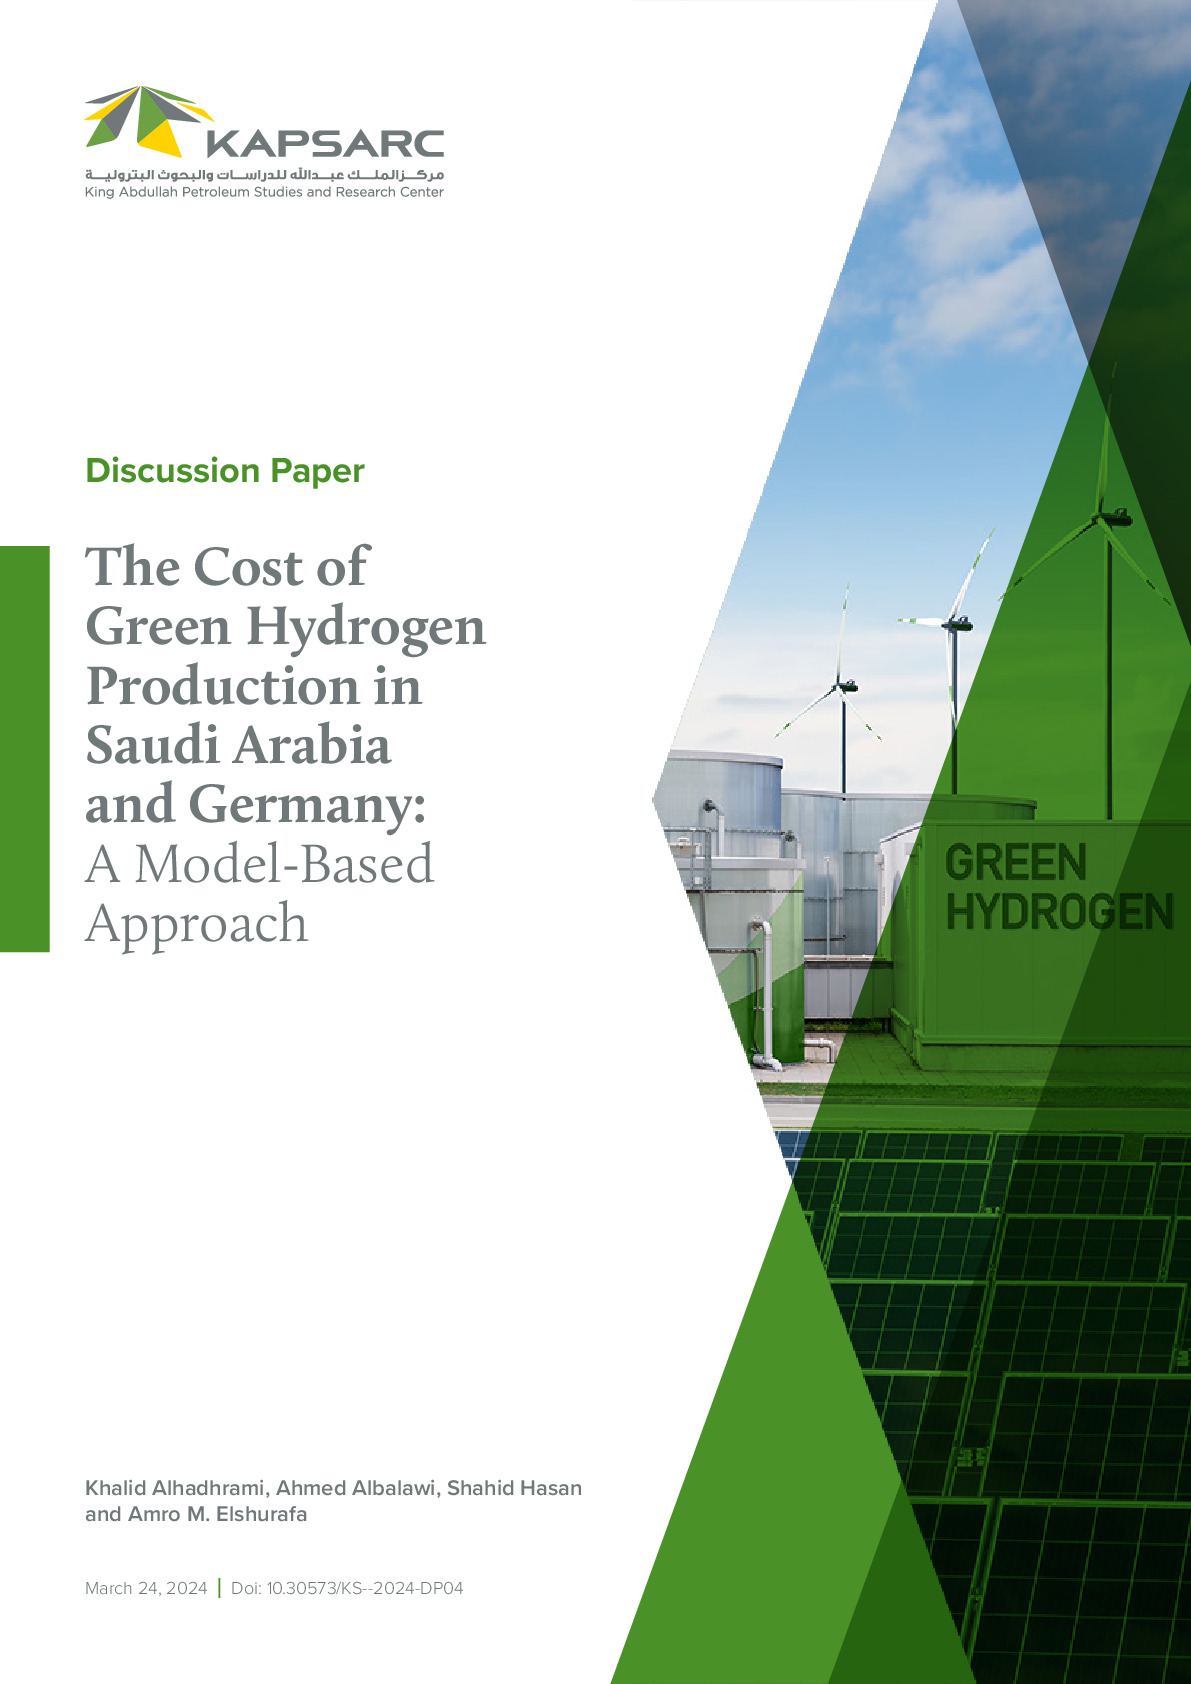 The Cost of Green Hydrogen Production in Saudi Arabia and Germany: A Model-Based Approach